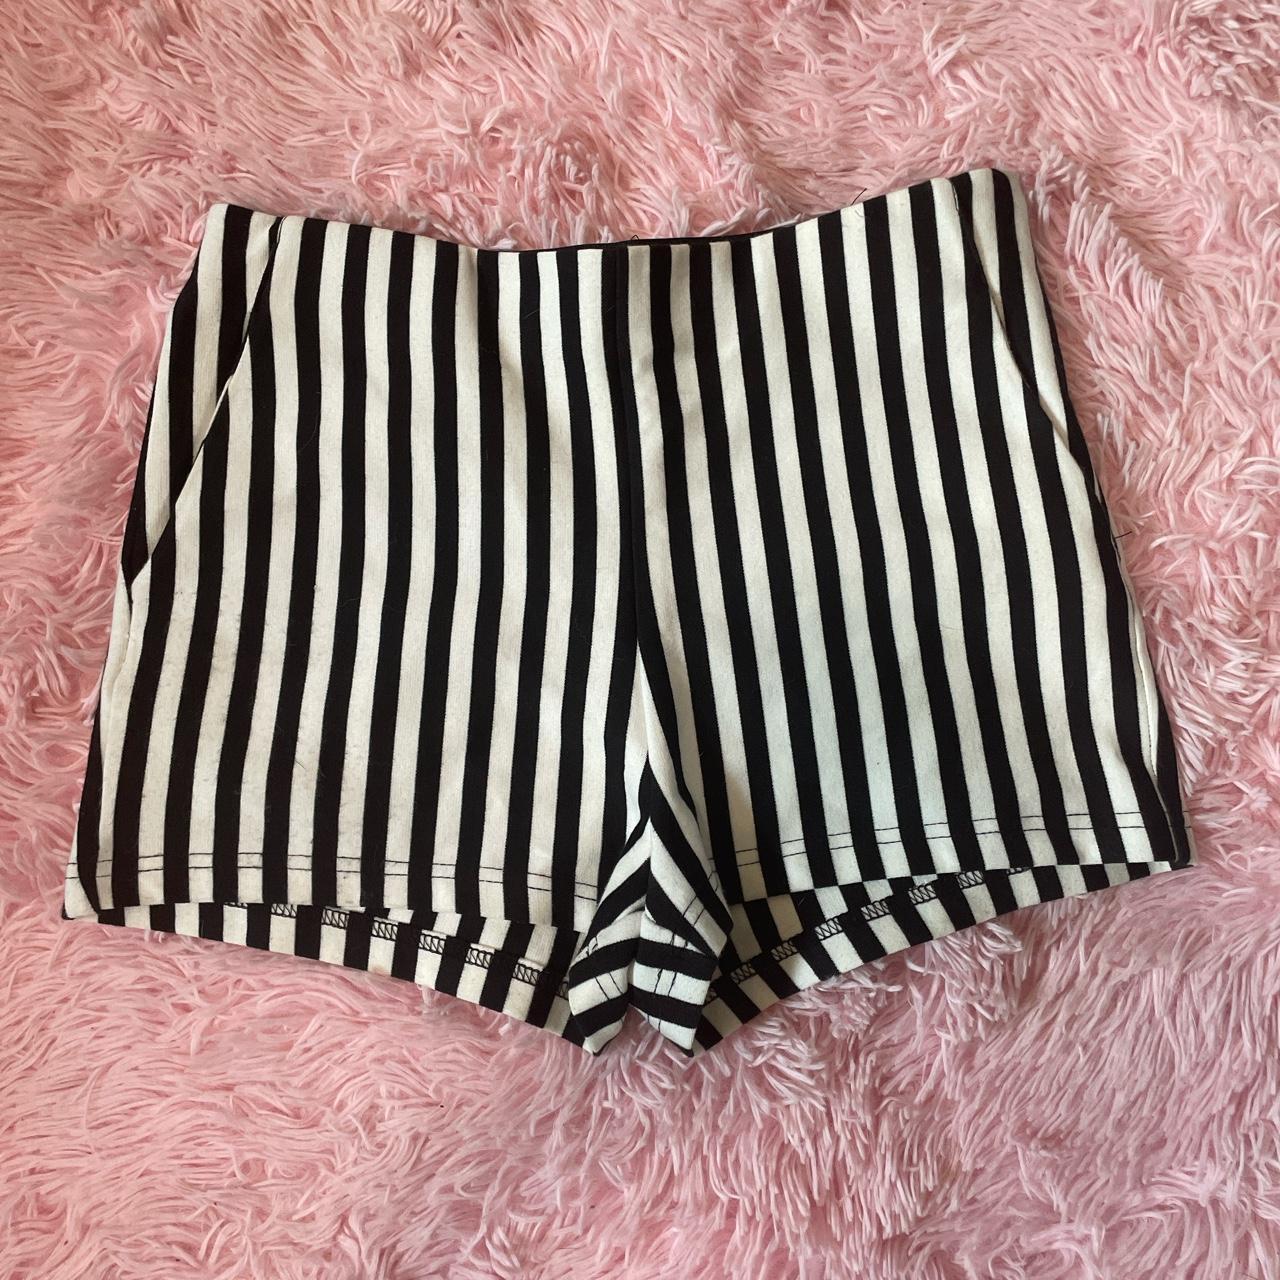 Forever 21, high waisted black and white striped...